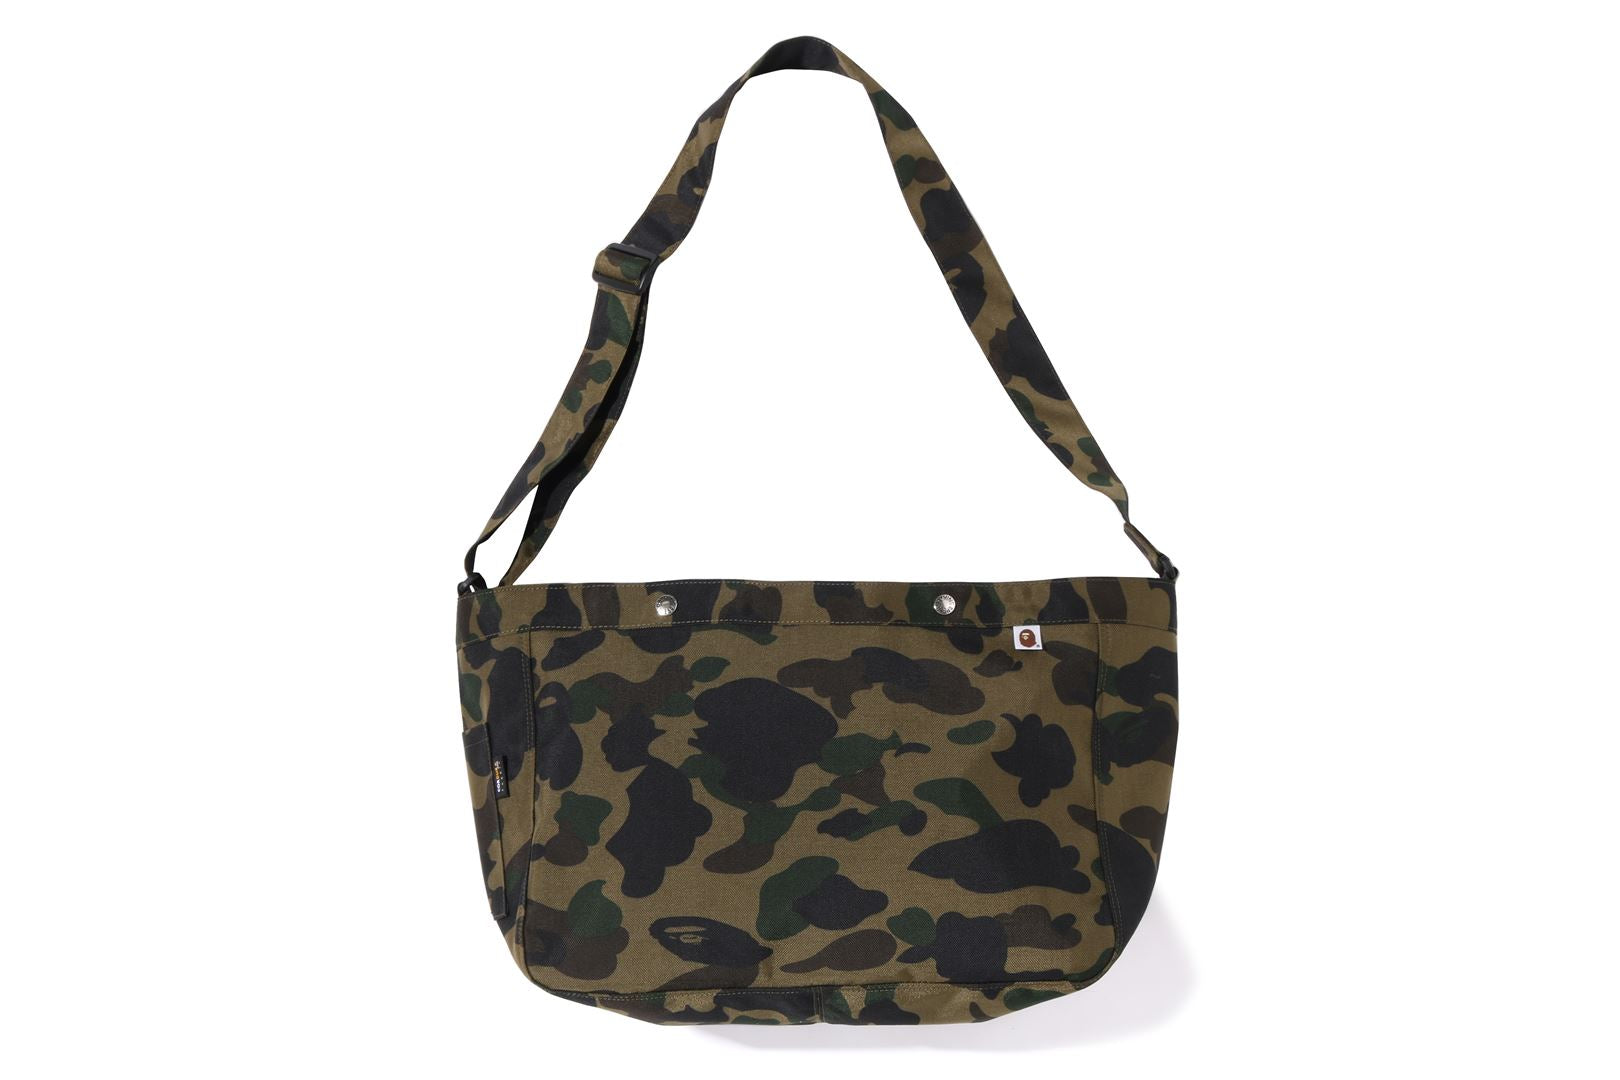 leopard camo bag 90s 初期 - 旅行かばん・小分けバッグ